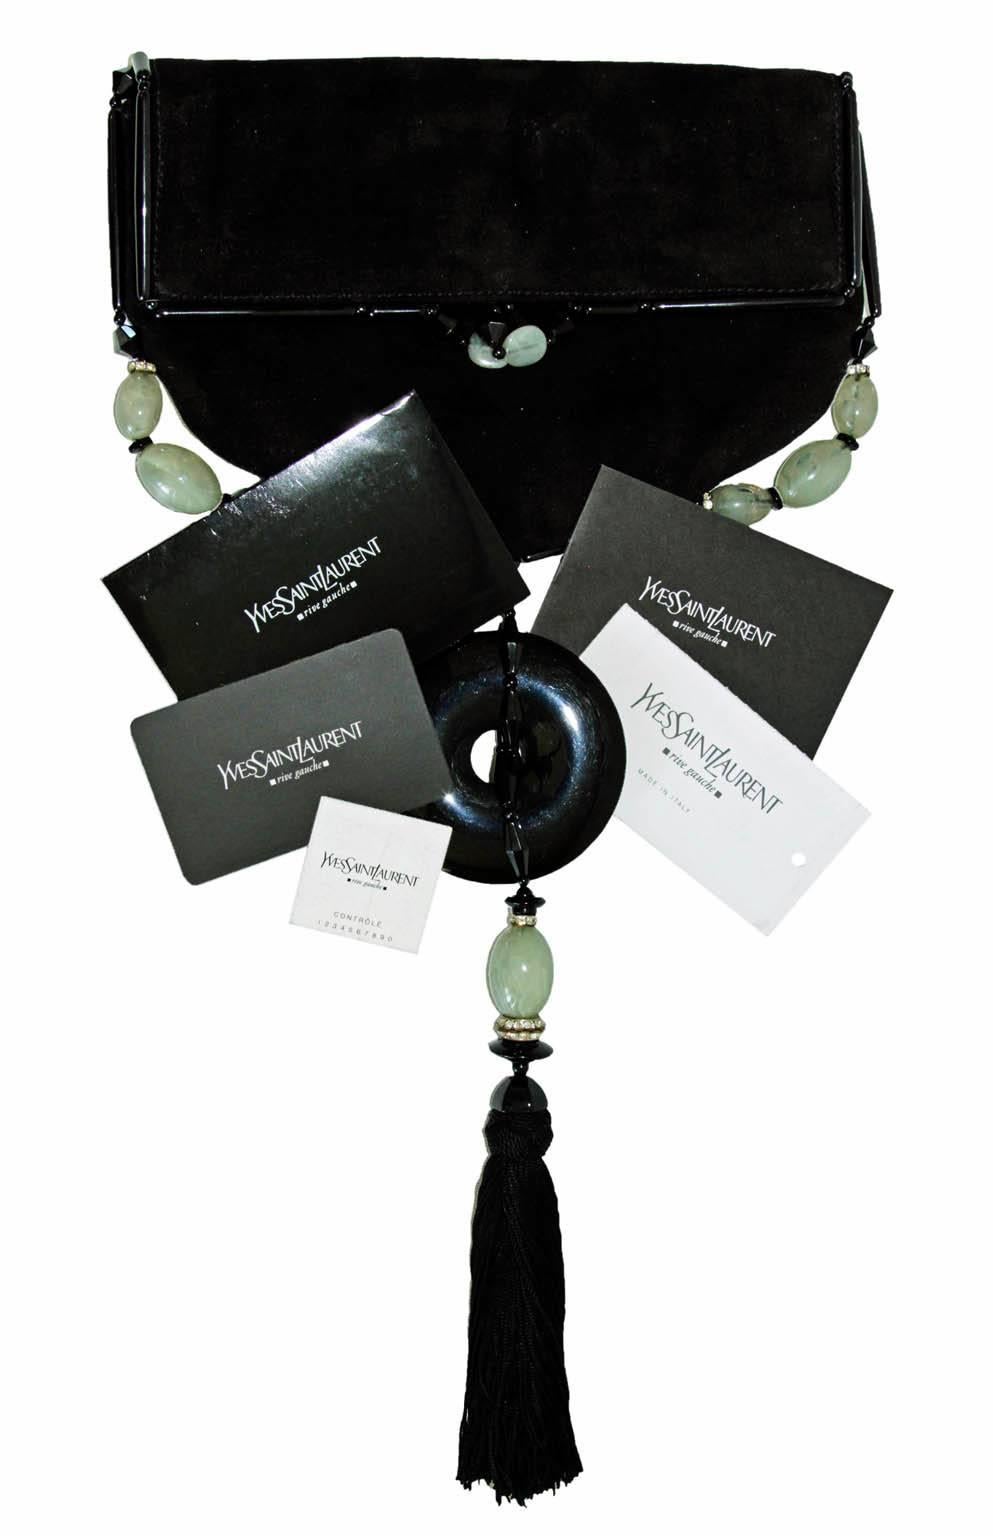 Who could ever forget that Incredible black suede leather runway bag with the tassel work and swarovski crystal detailing from Tom Ford's dreamy fall/winter 2004 collection for Yves Saint Laurent Rive Gauche? This small clutch sized bag is  an